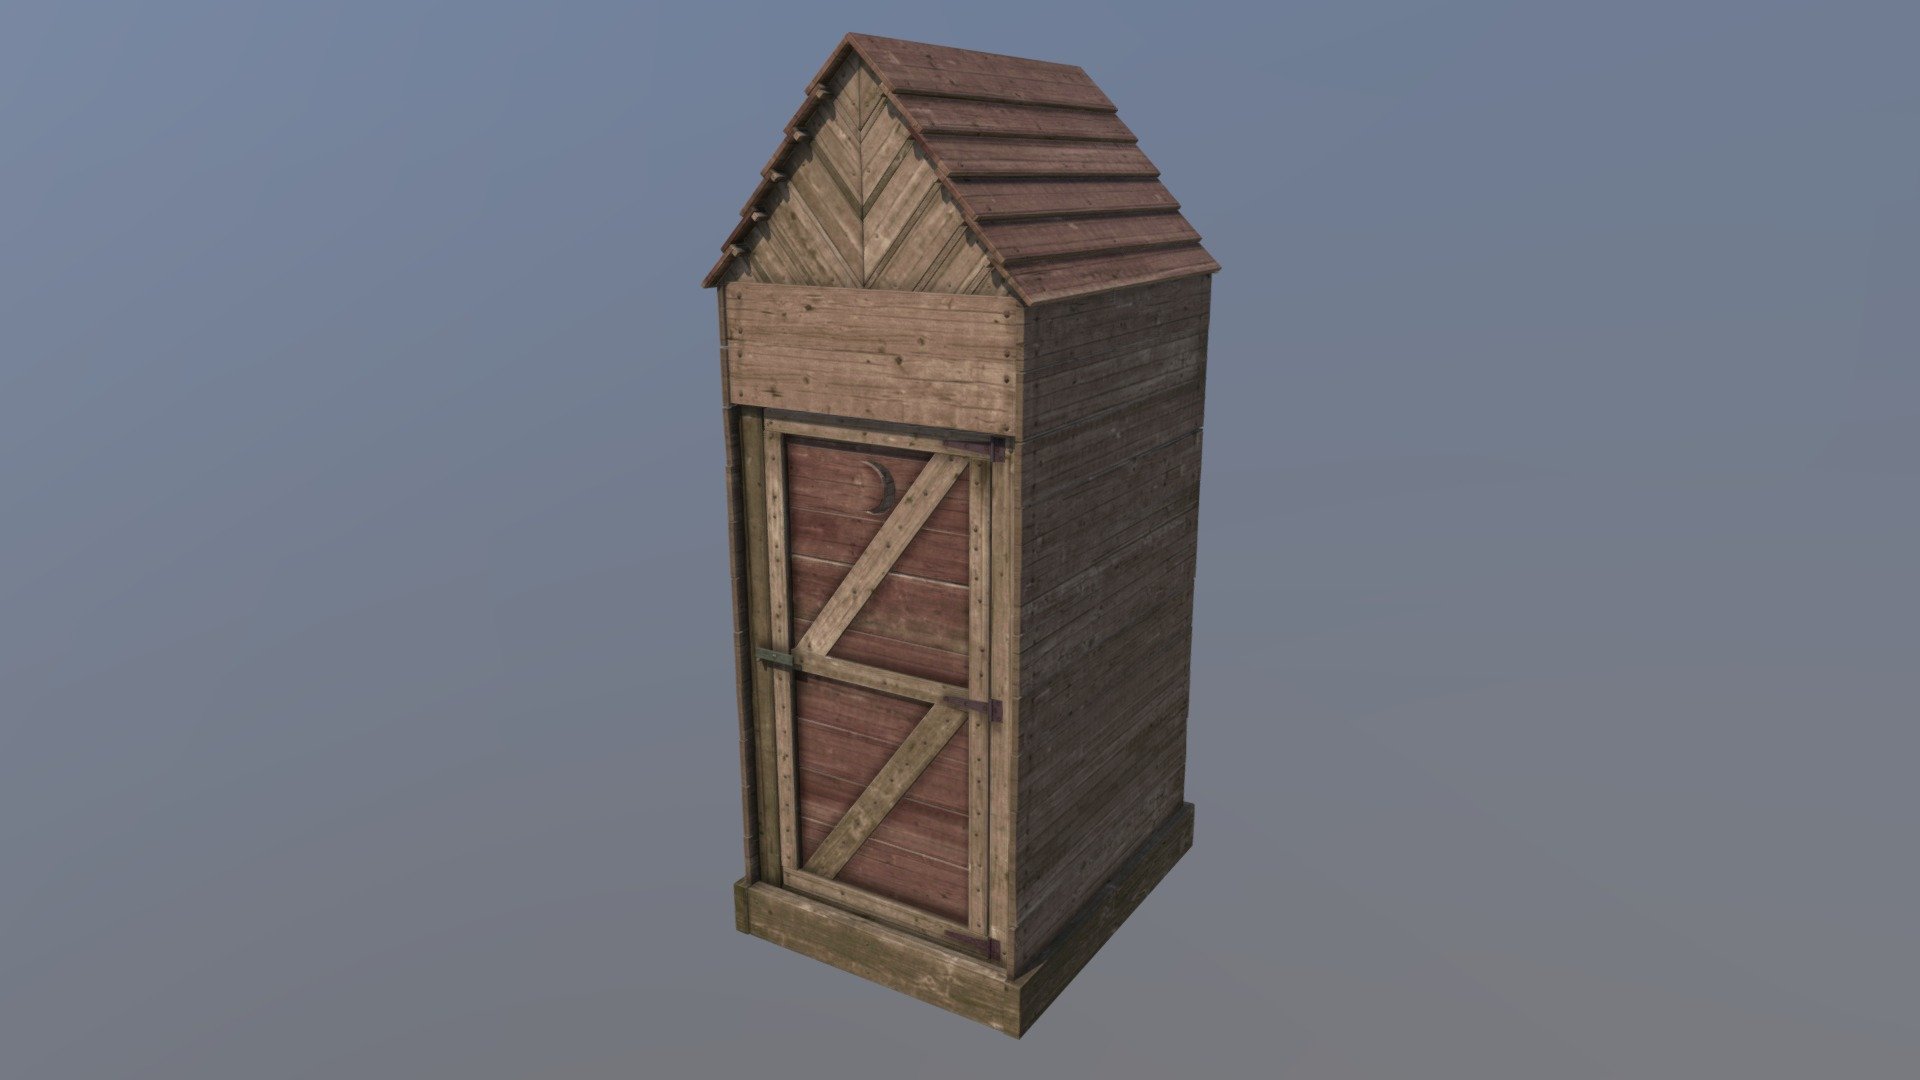 When you have to go, you have to go&hellip;
An old school outhouse, with the door and handles rigged 3d model